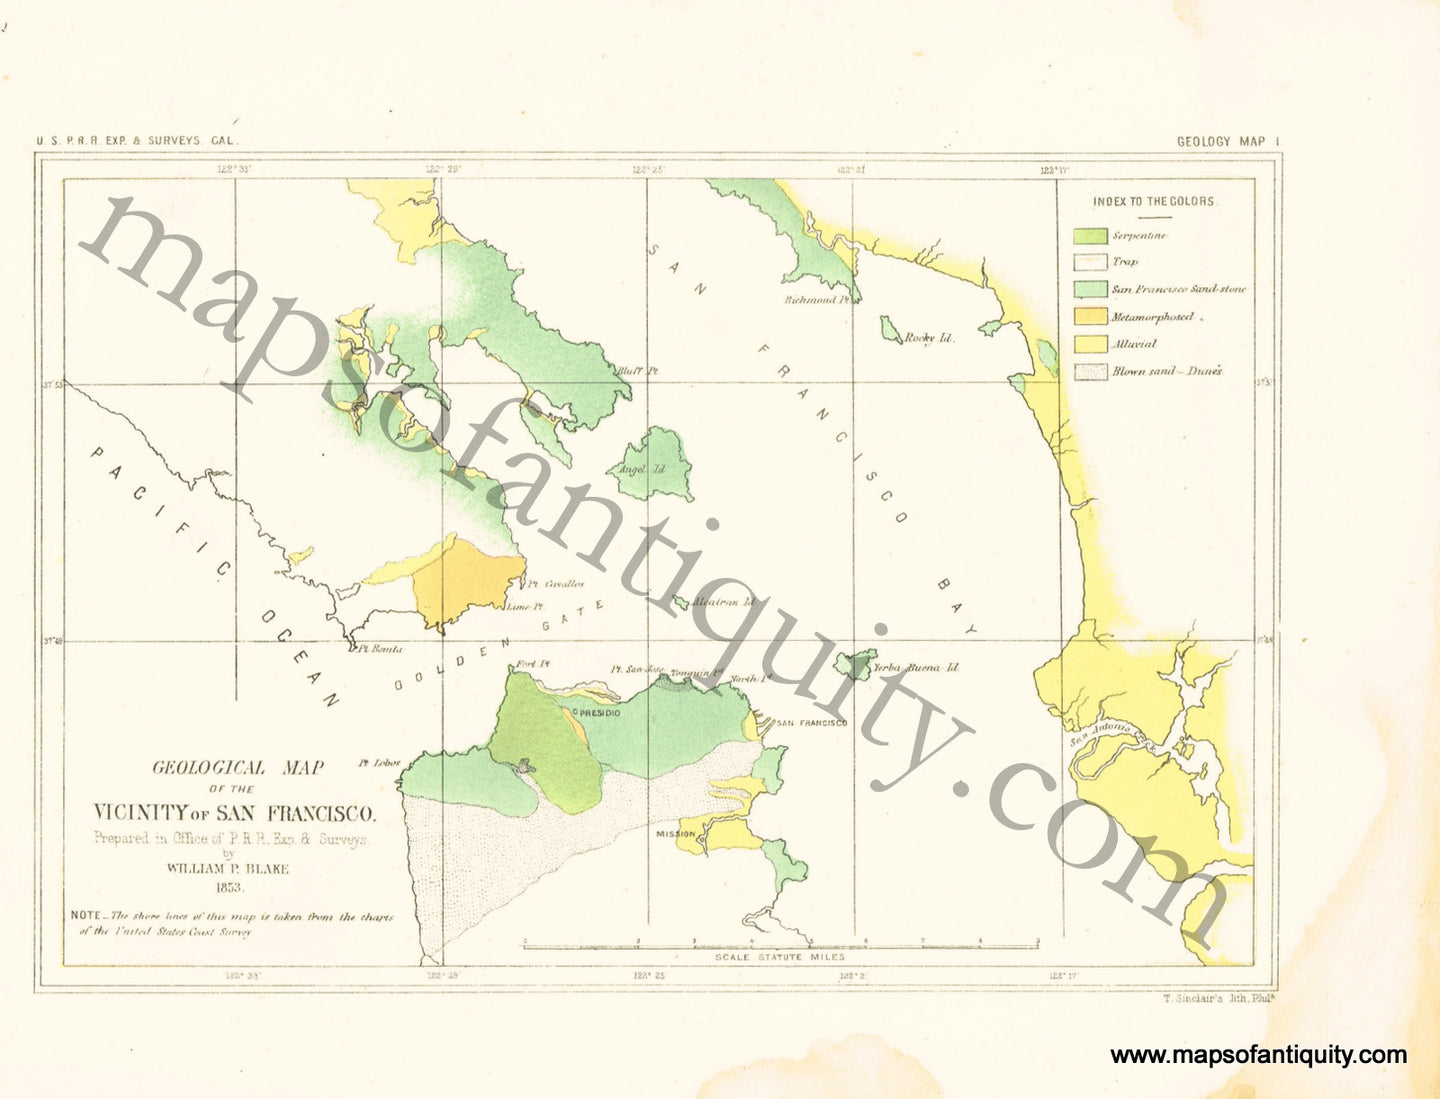 Antique-Hand-Colored-Map-Geological-Map-of-the-Vicinity-of-San-Francisco-**********-Geological-Maps-City-Views-San-Francisco-1853-U.S.-Pacific-R.R.-Surveys/-W.P.-Blake-Maps-Of-Antiquity